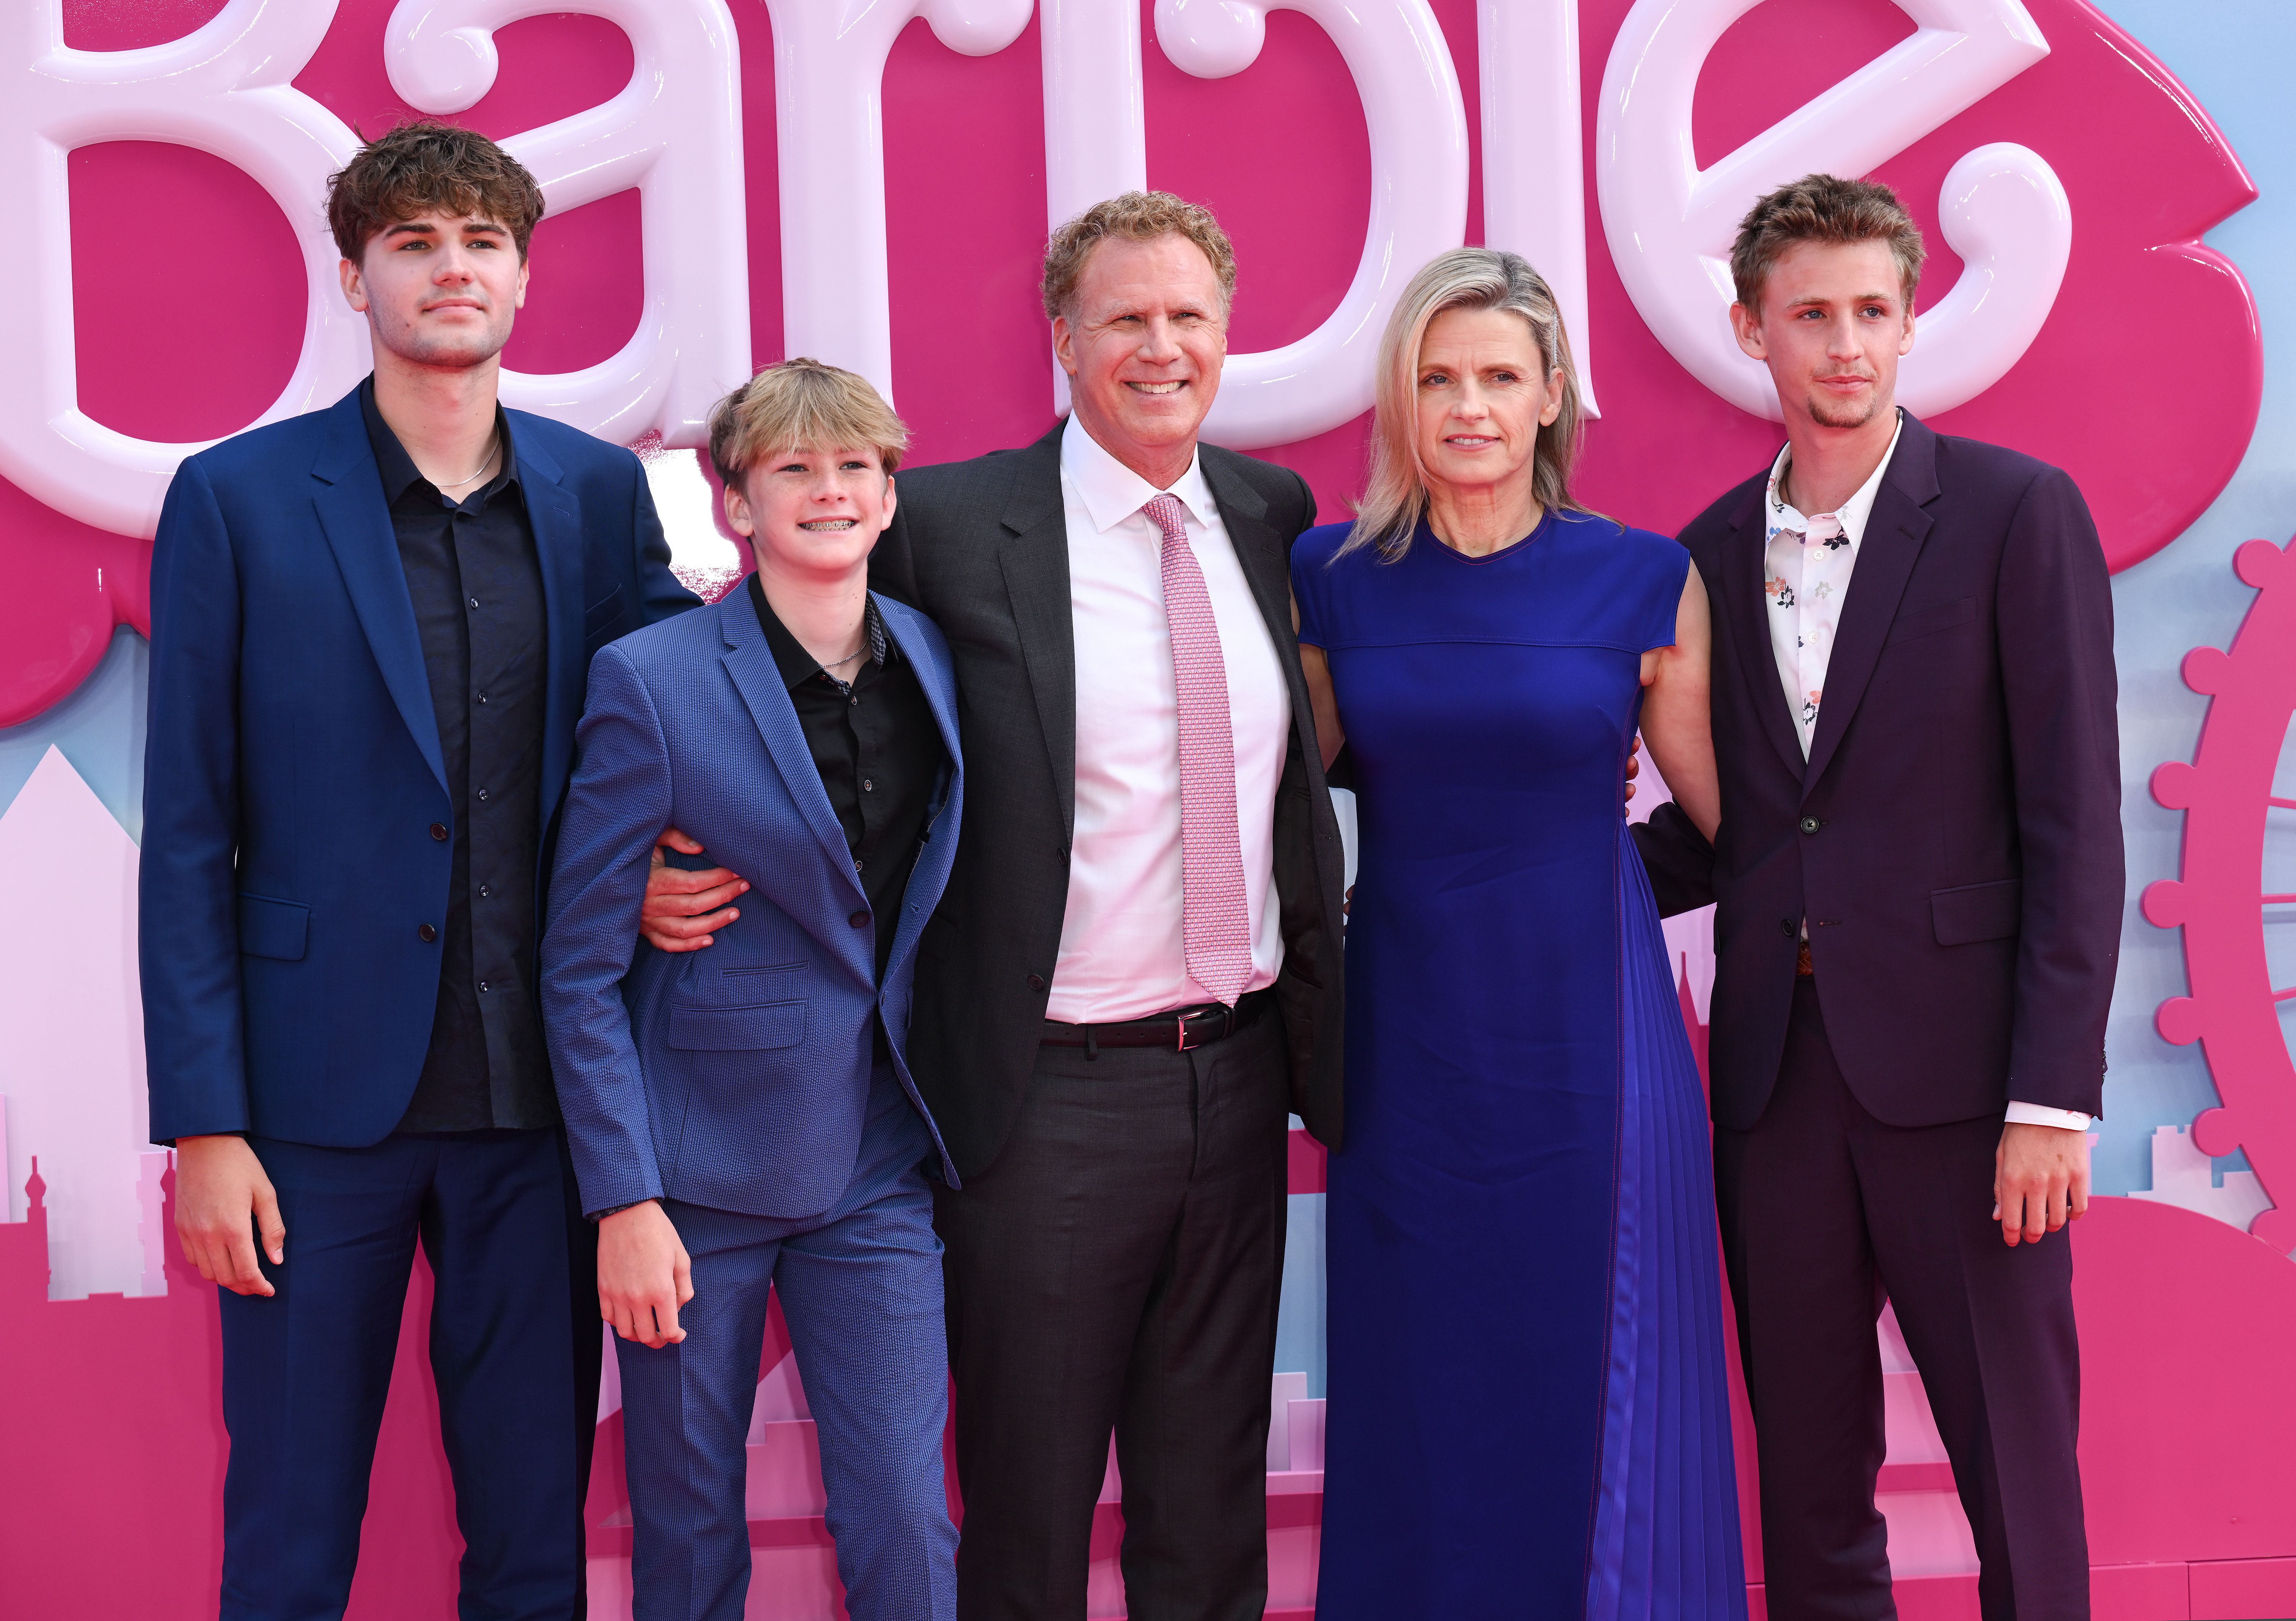 Will Ferrell and Viveca Paulin with their sons Mattias, Axel, and Magnus at the European premiere of "Barbie," 2023 | Source: Getty Images